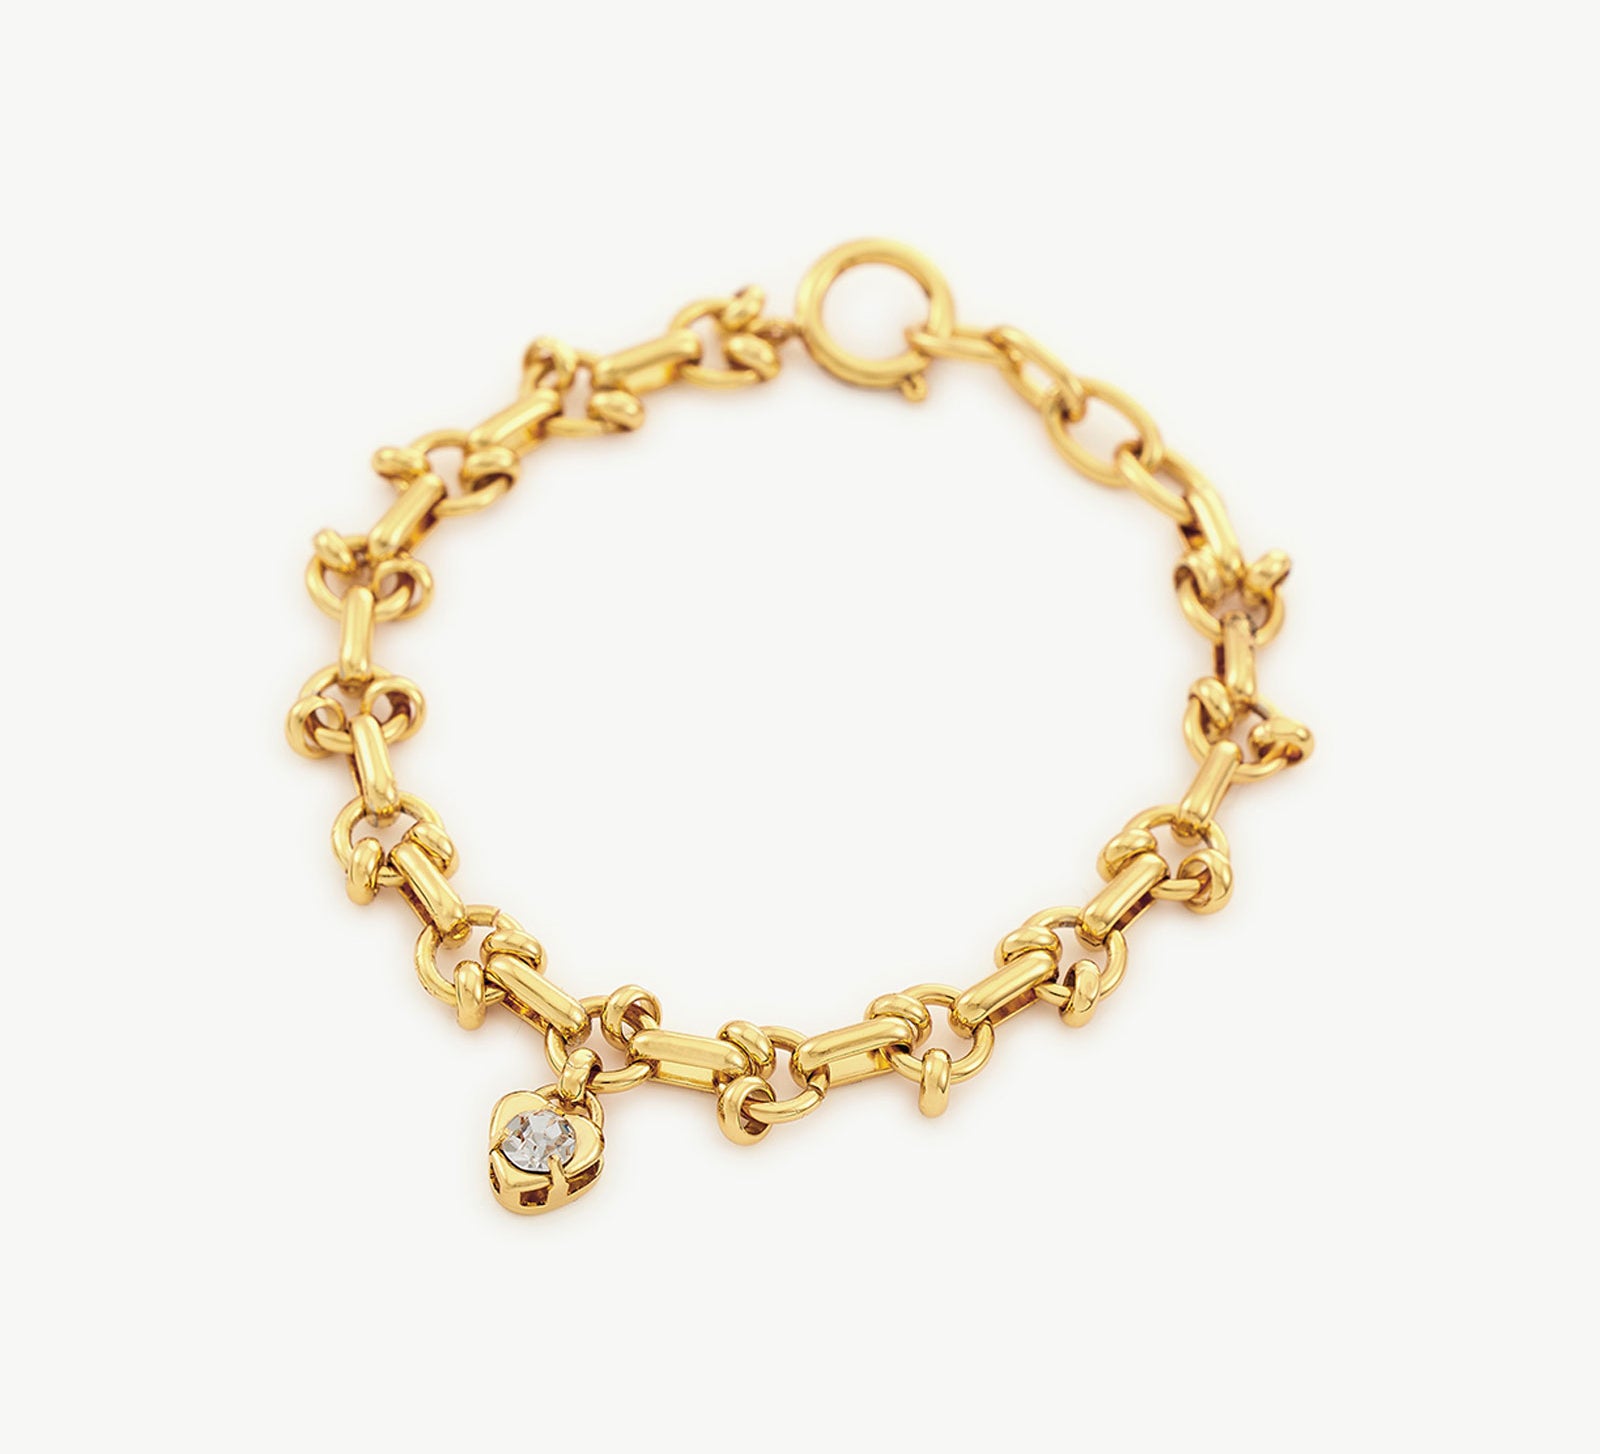 Diamond Heart Chain Bracelet in Gold, a timeless piece that exudes elegance, this bracelet features a delicate chain adorned with diamond-studded hearts, creating a luxurious and classic accessory for any occasion